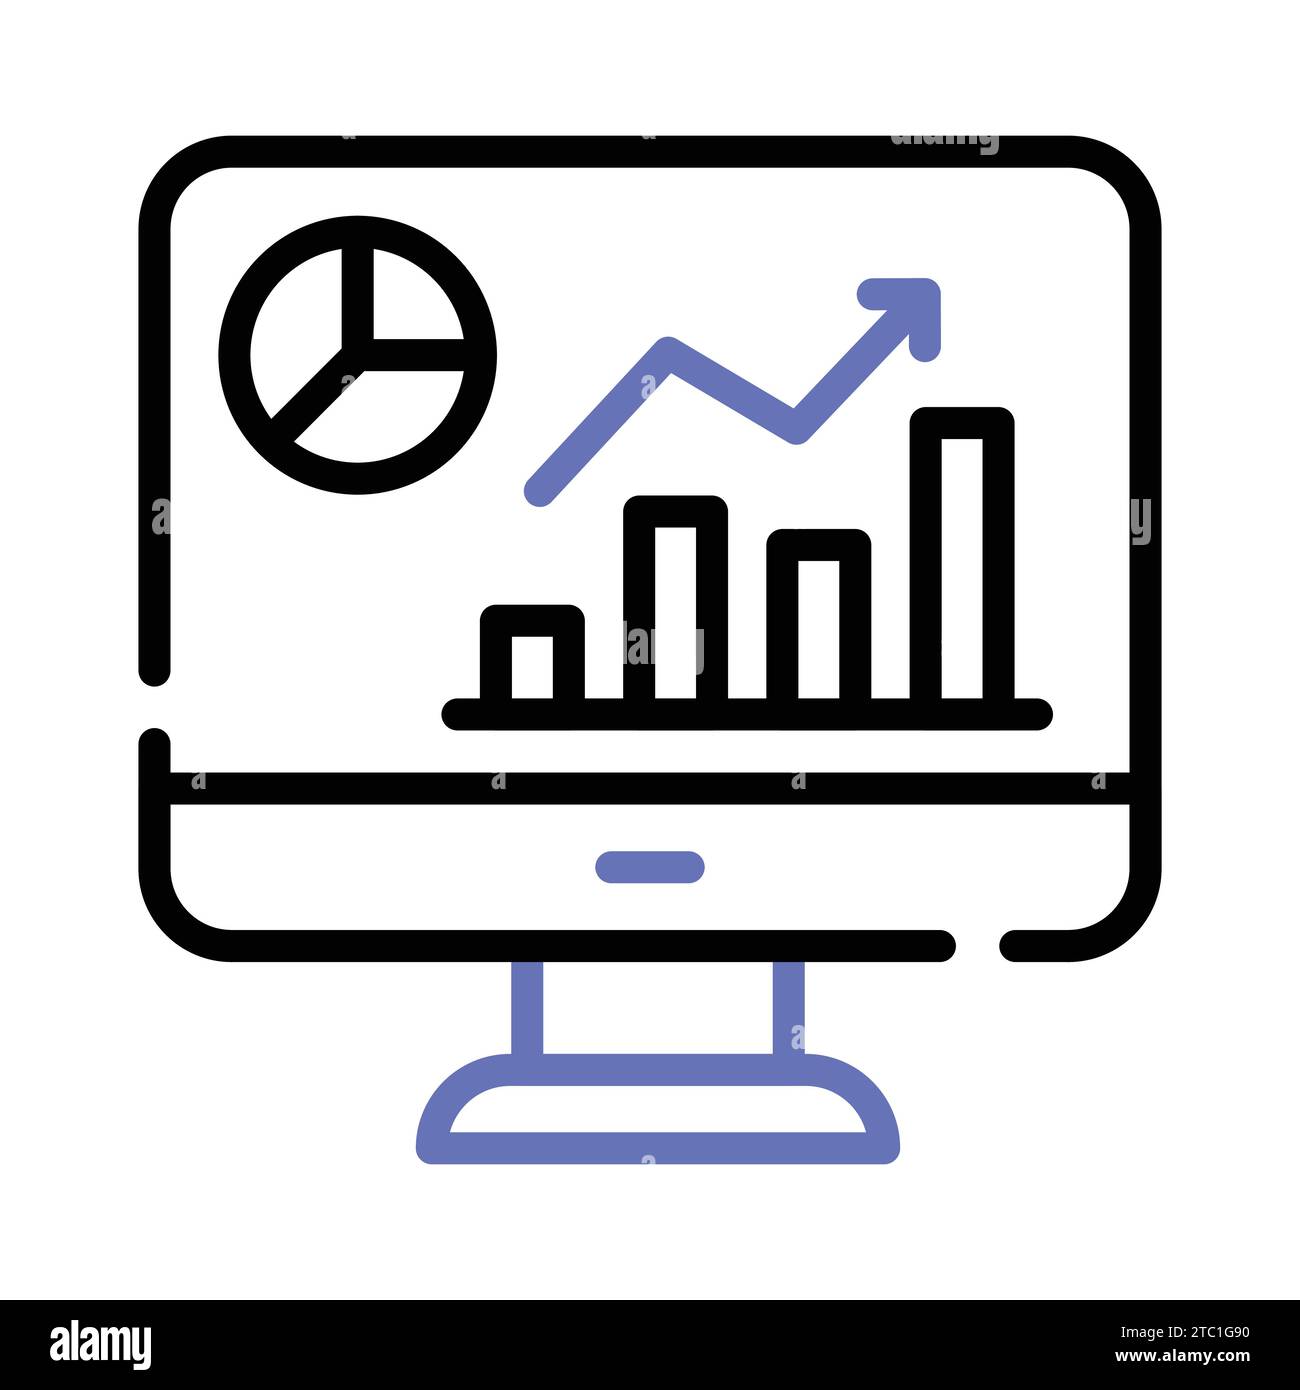 Data chart on lcd display showing vector of market analysis in modern style. Stock Vector